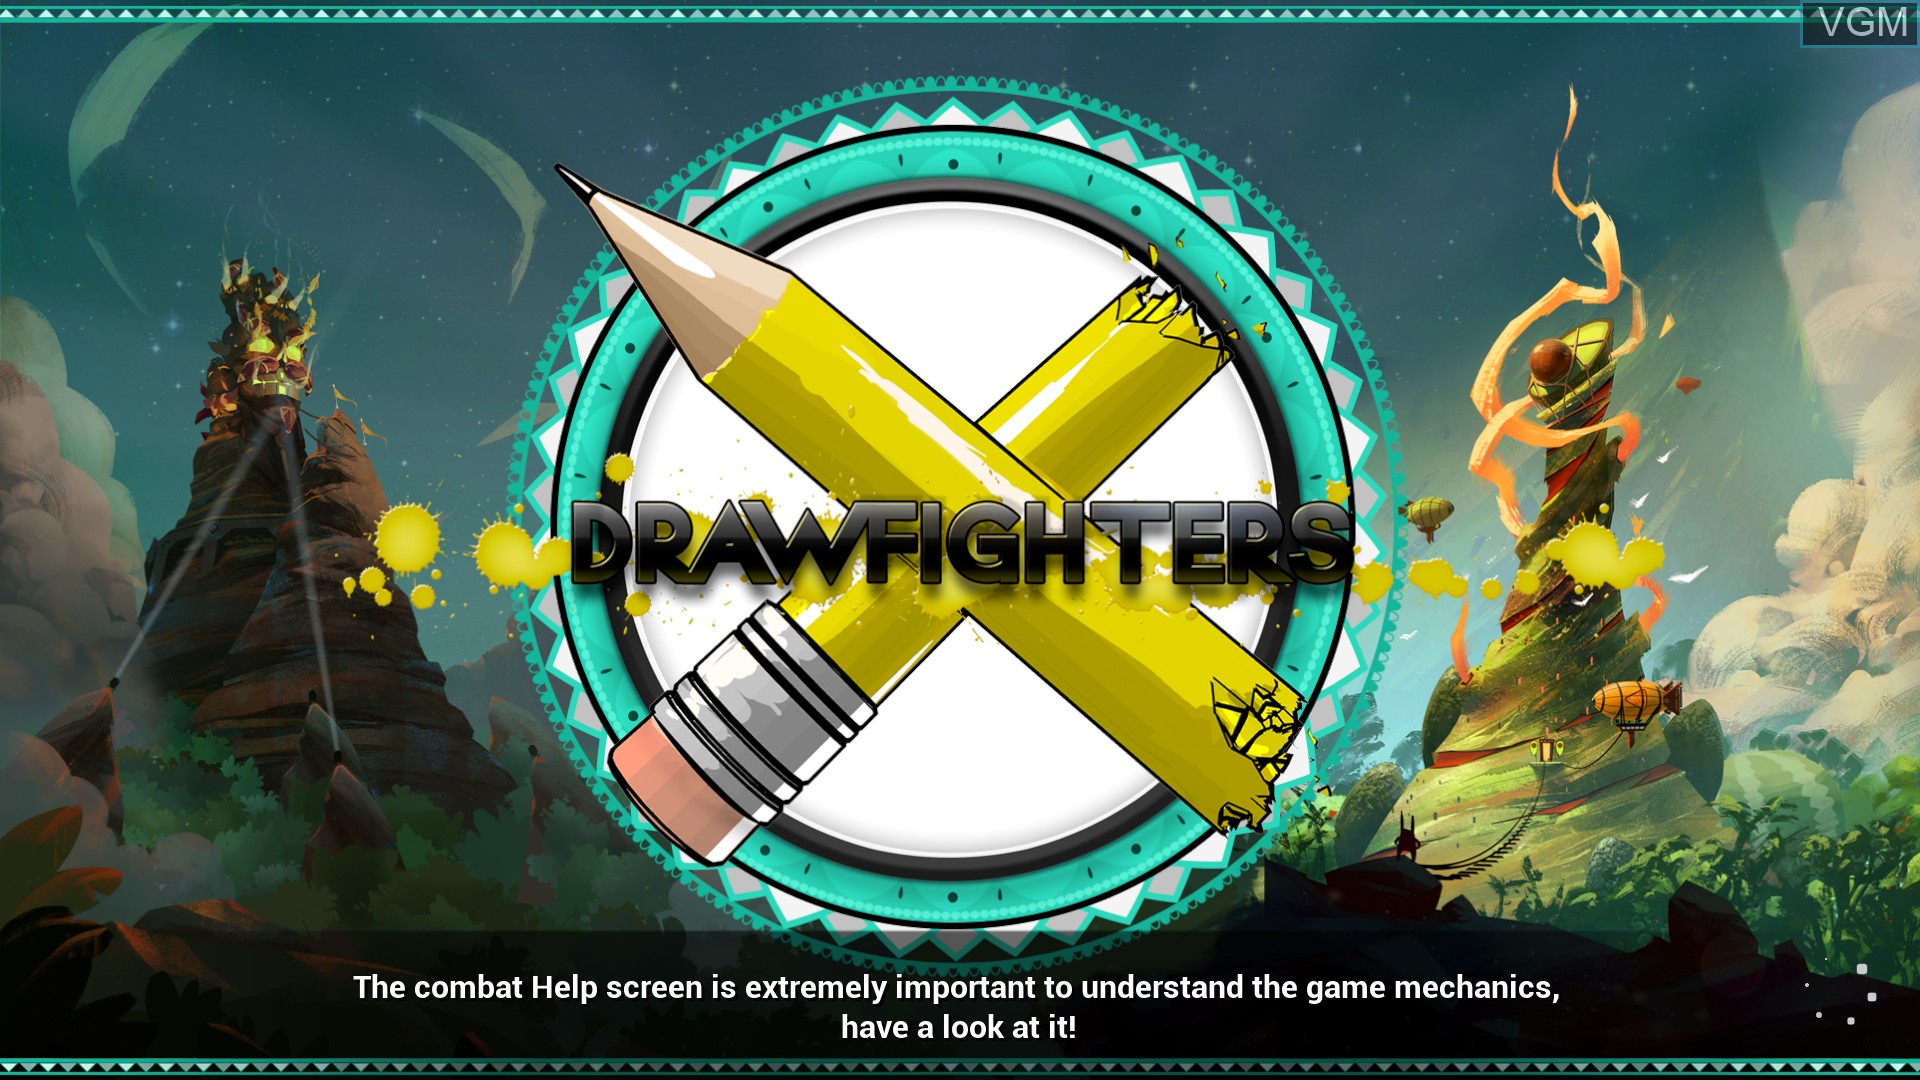 Drawfighters for Sony Playstation 4 The Video Games Museum